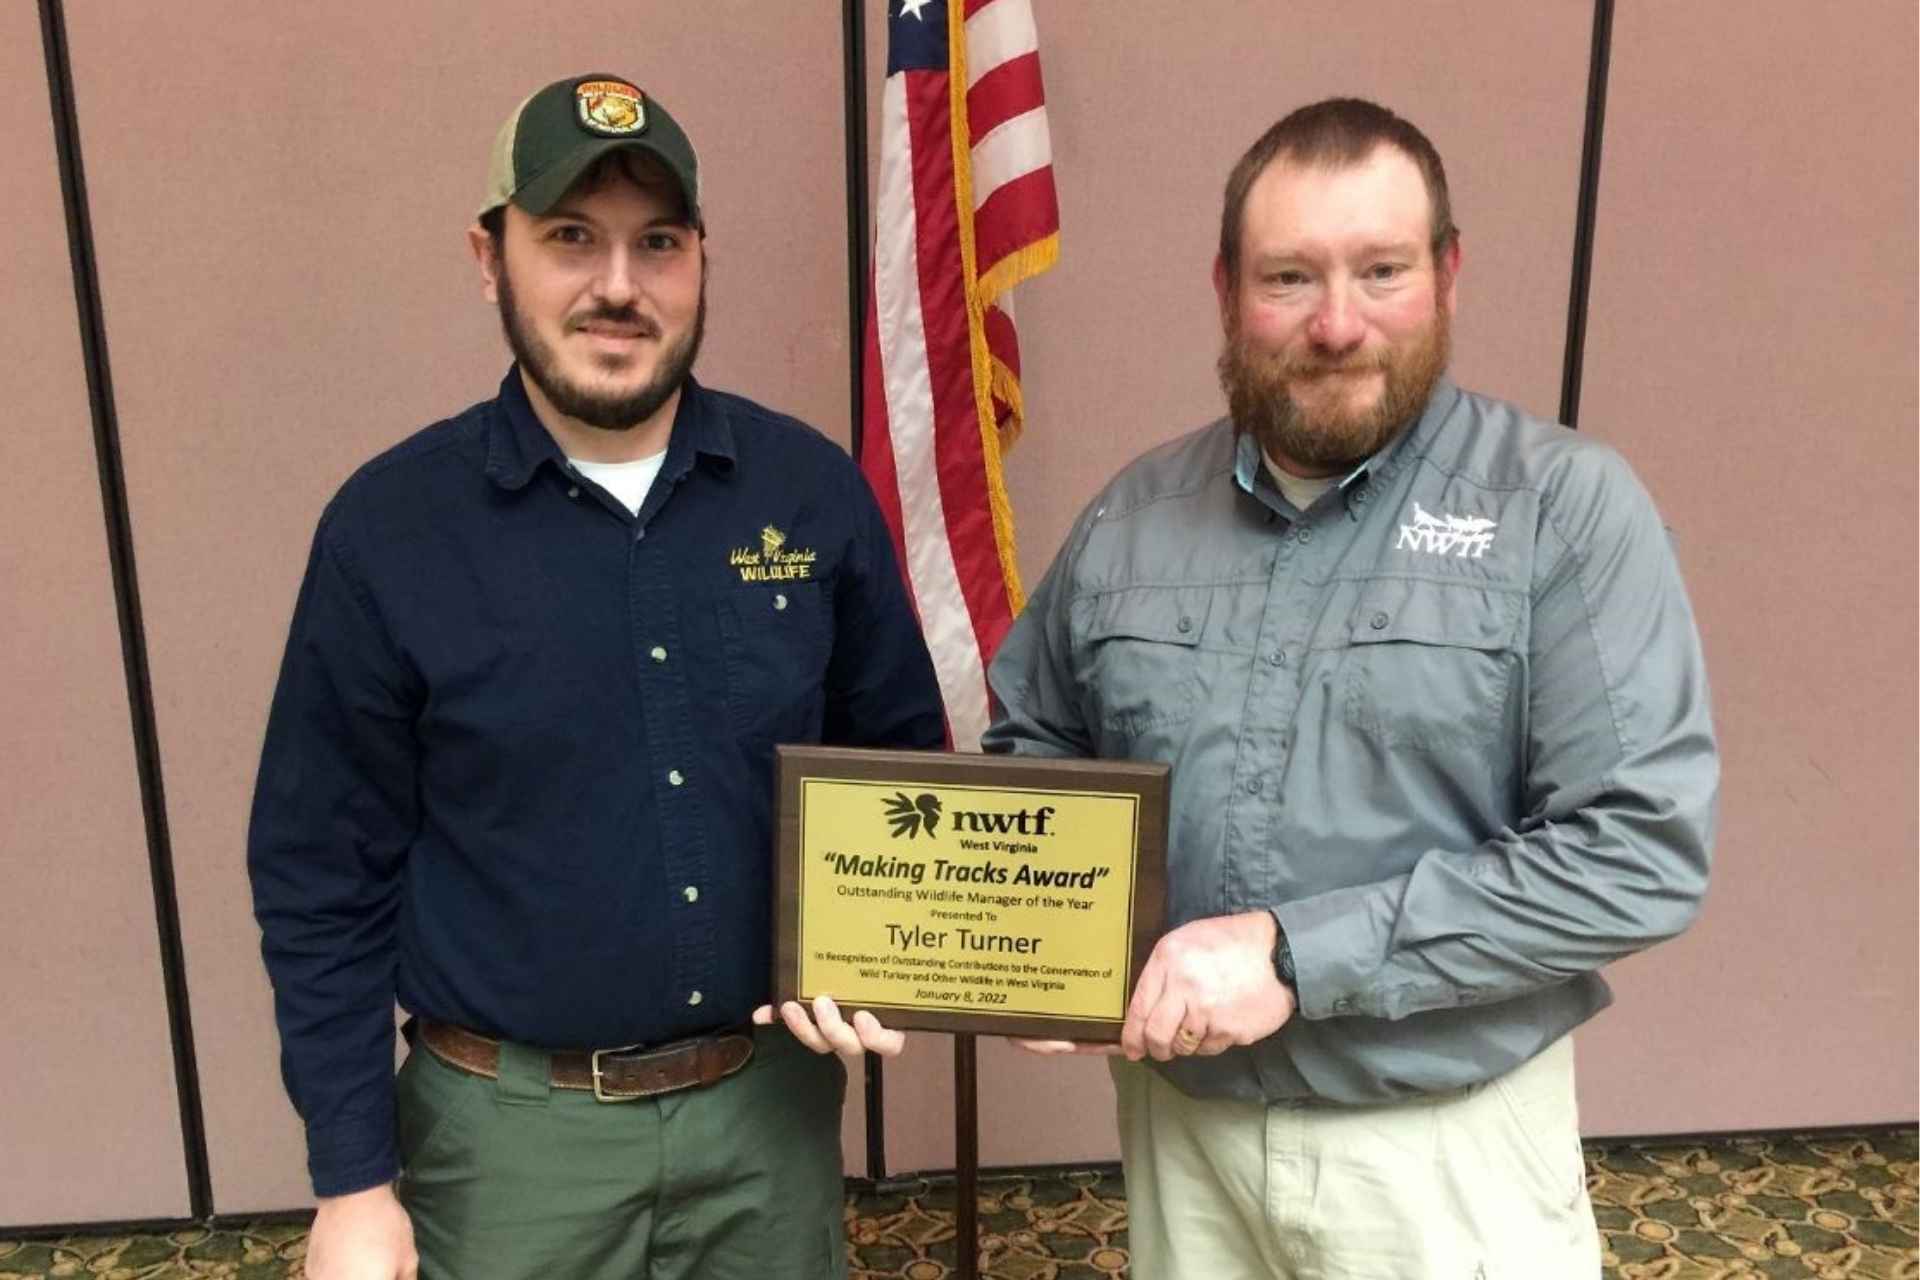 Tyler Turner, left, with Jeff Jones, right. Jones is president of the National Wild Turkey Federation West Virginia State Chapter.